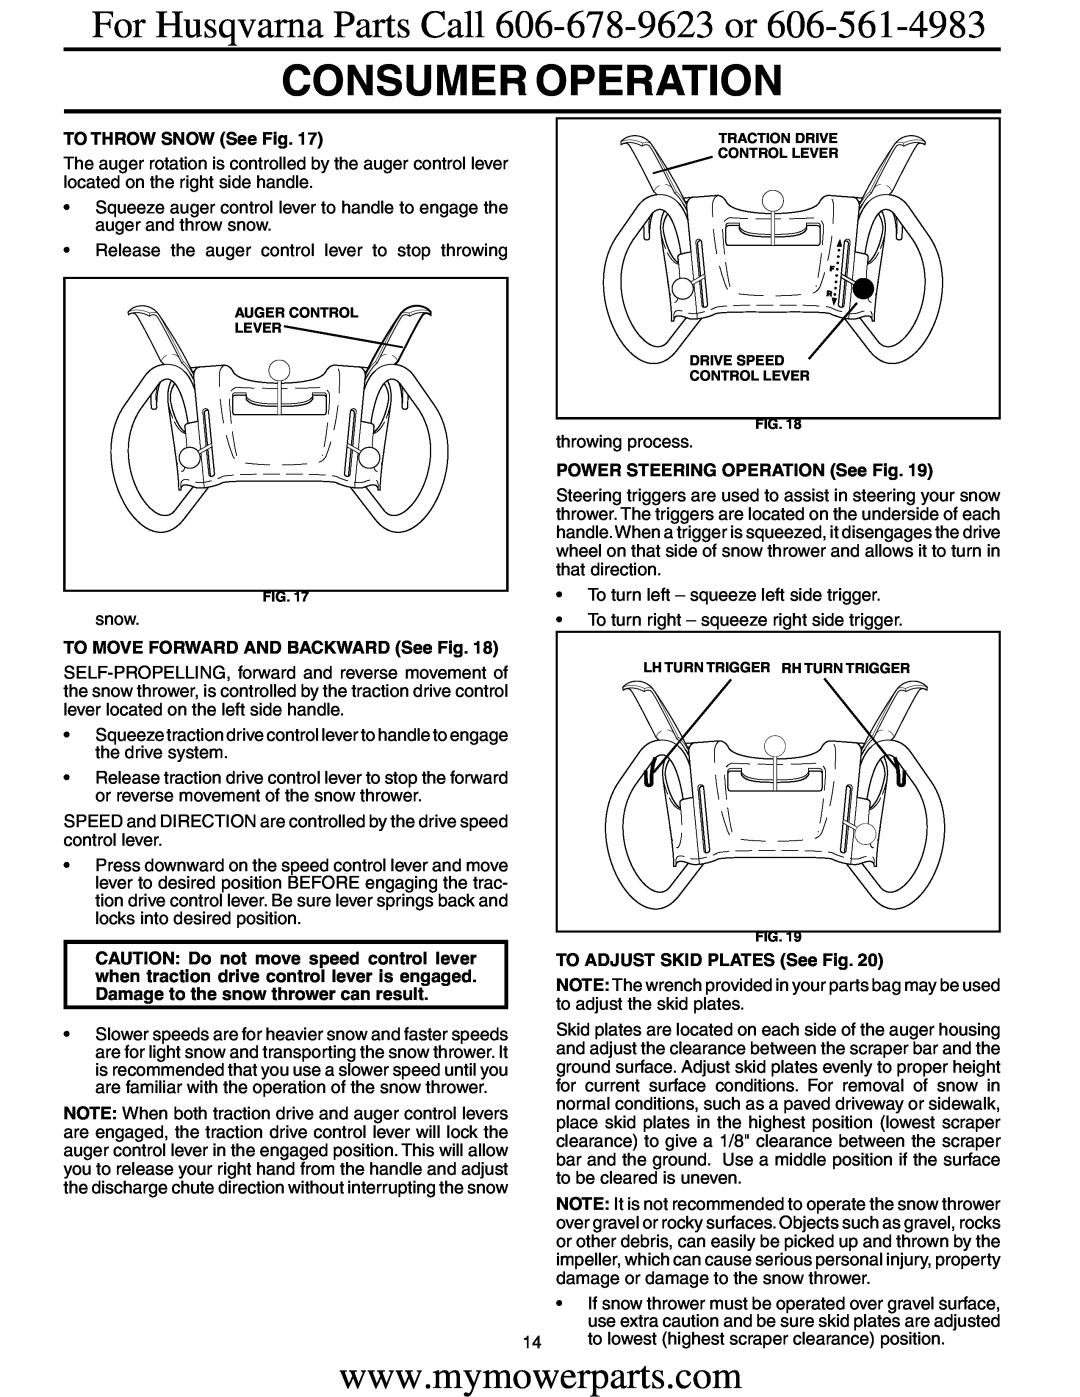 Electrolux OHV service manual Consumer Operation, For Husqvarna Parts Call 606-678-9623 or, TO THROW SNOW See Fig 